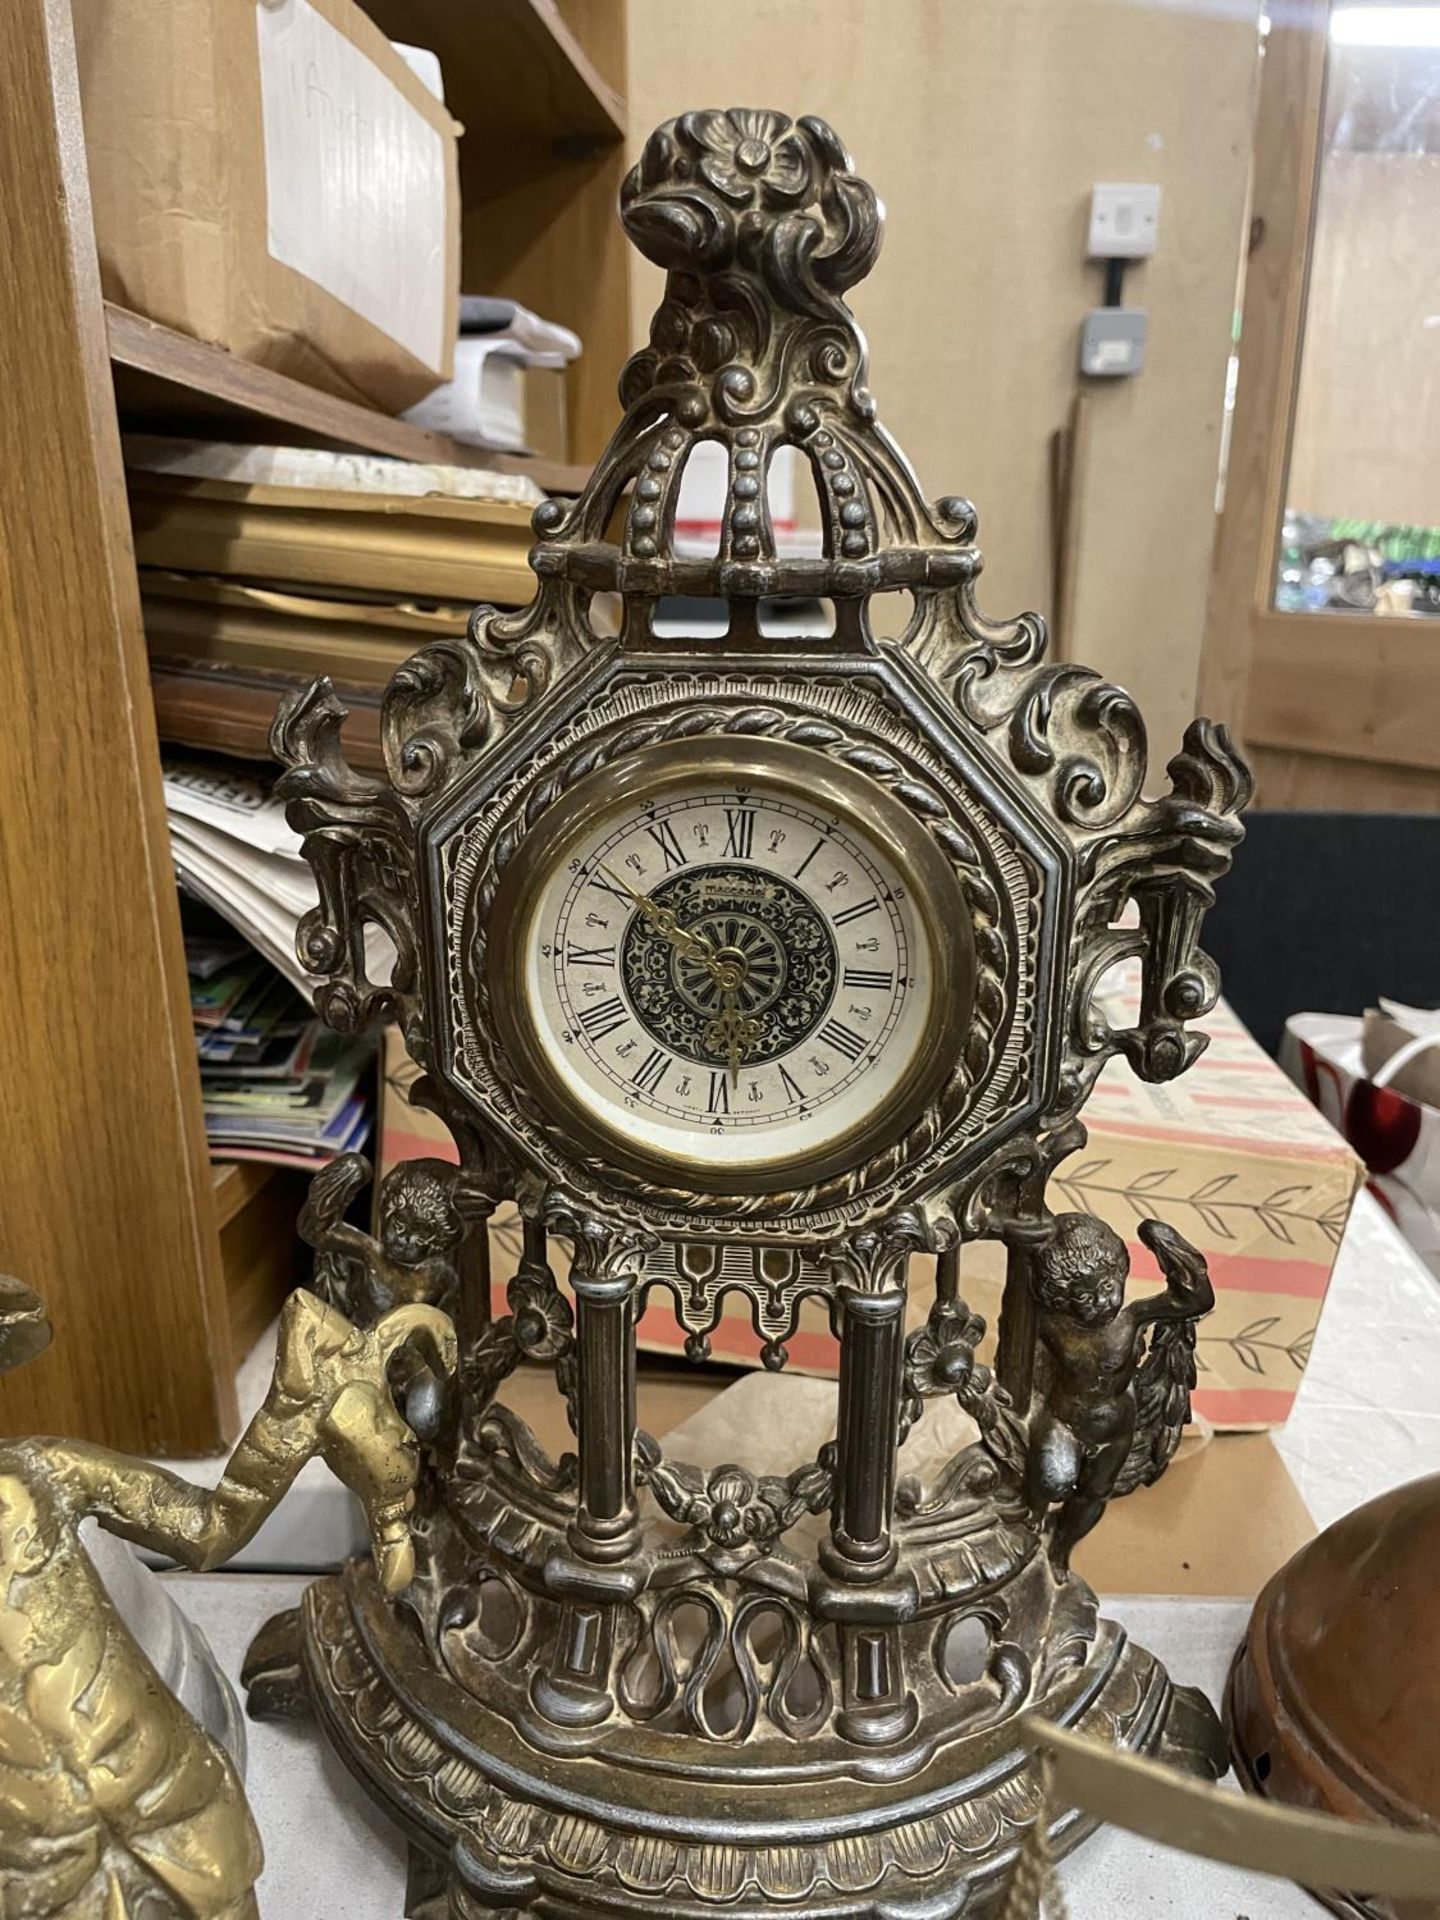 A LARGE QUANTITY OF BRASSWARE TO INCLUDE AN ORNATE MANTLE CLOCK, TOASTING FORKS, ANIMALS, ETC - Image 2 of 5